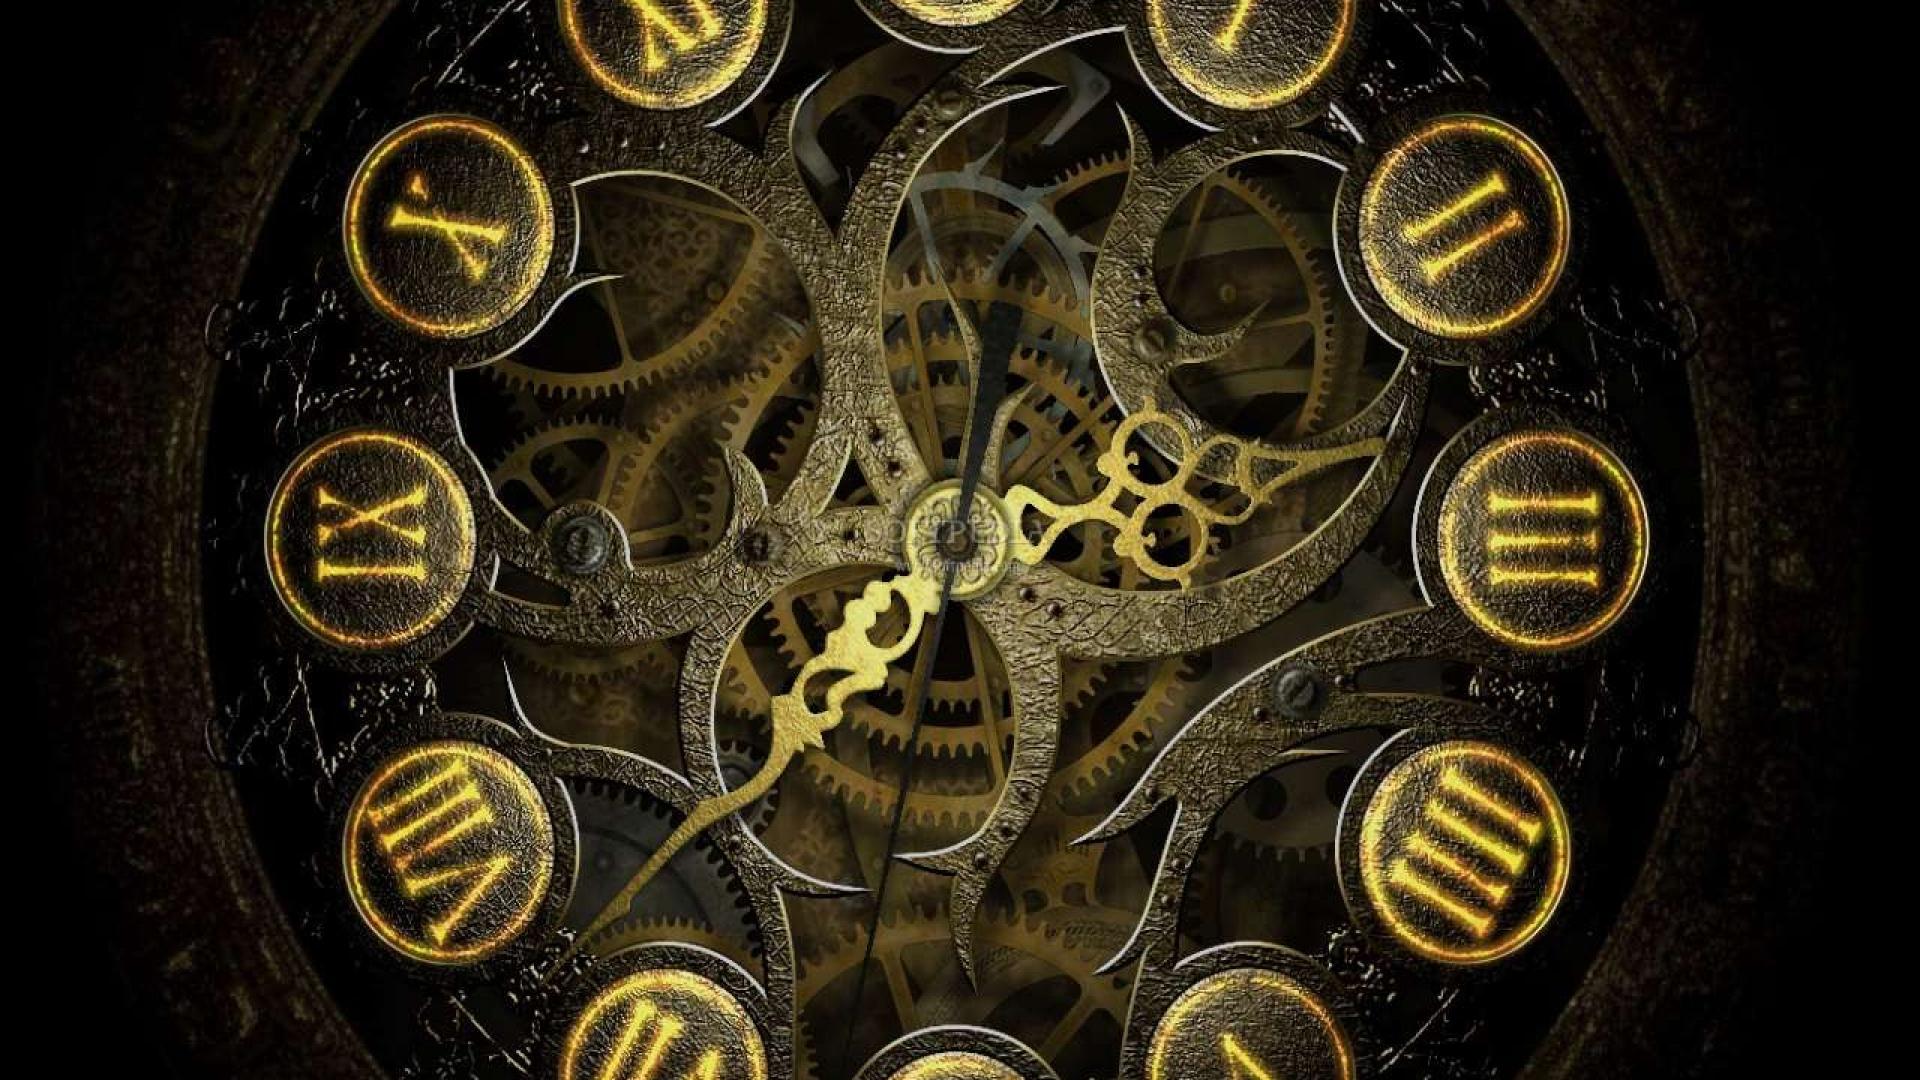 A clock with gears and roman numerals - Steampunk